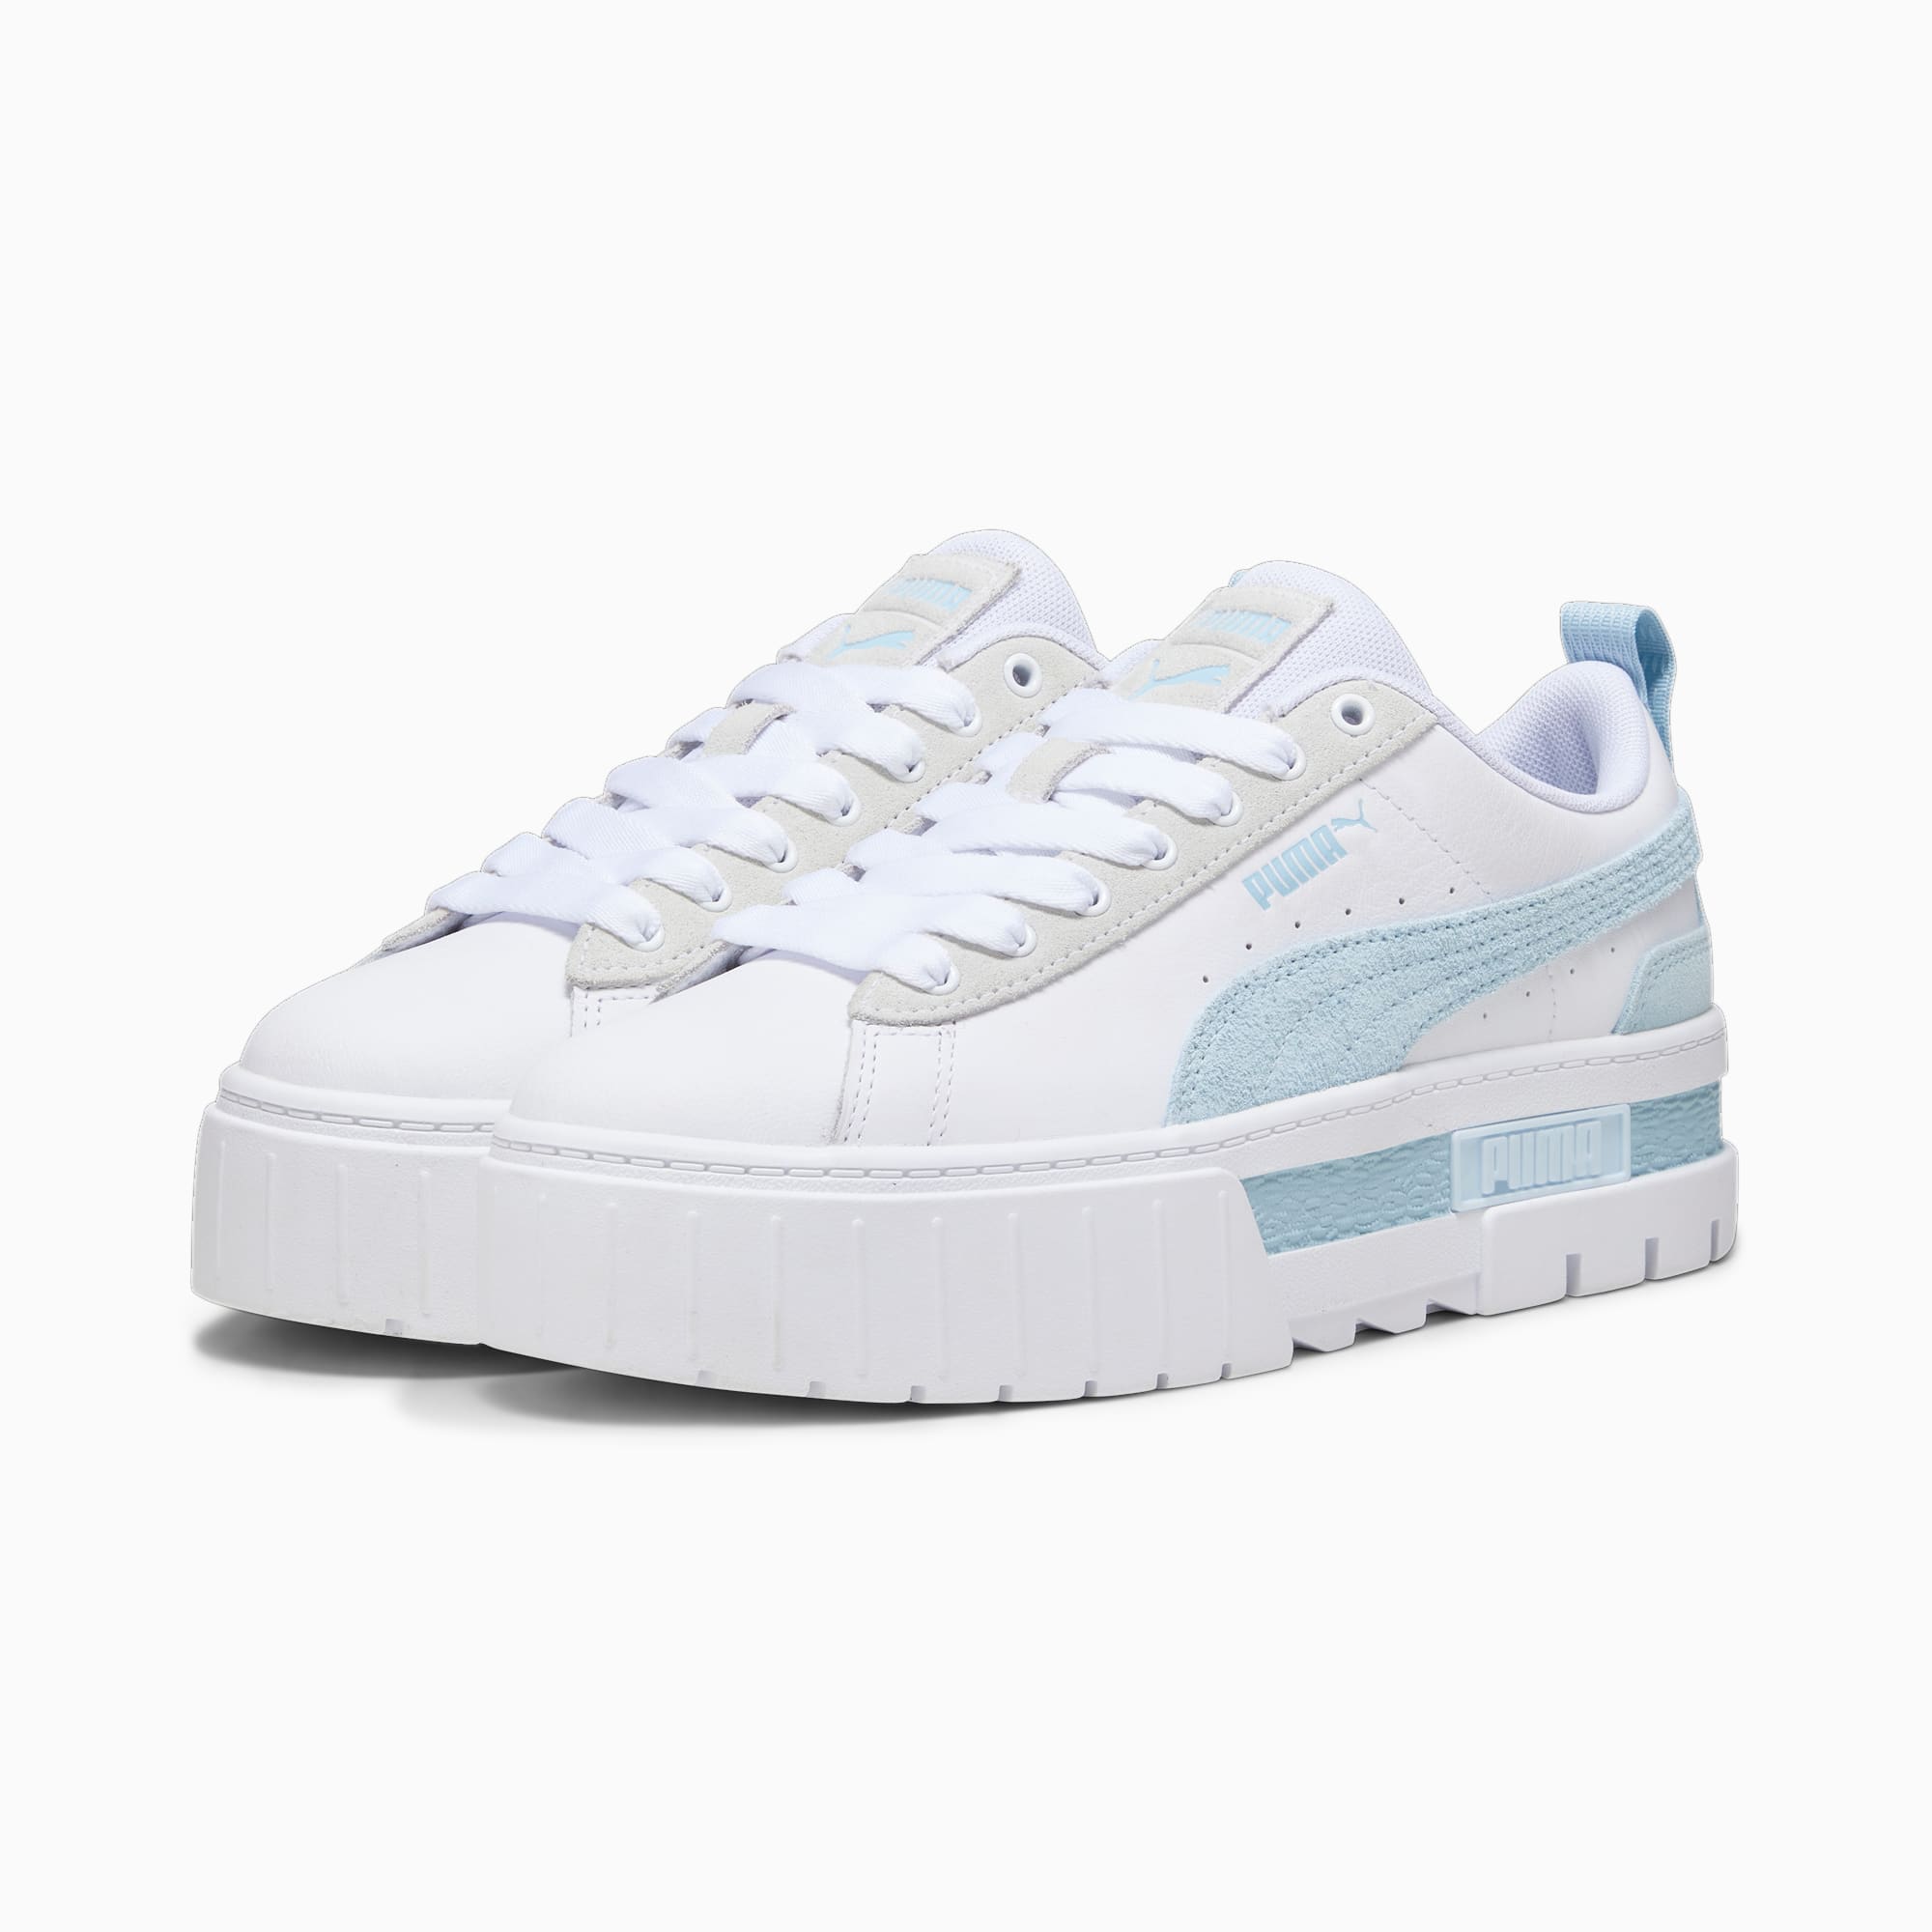 PUMA Mayze Mix Women's Sneakers, White/Icy Blue, Size 35,5, Shoes